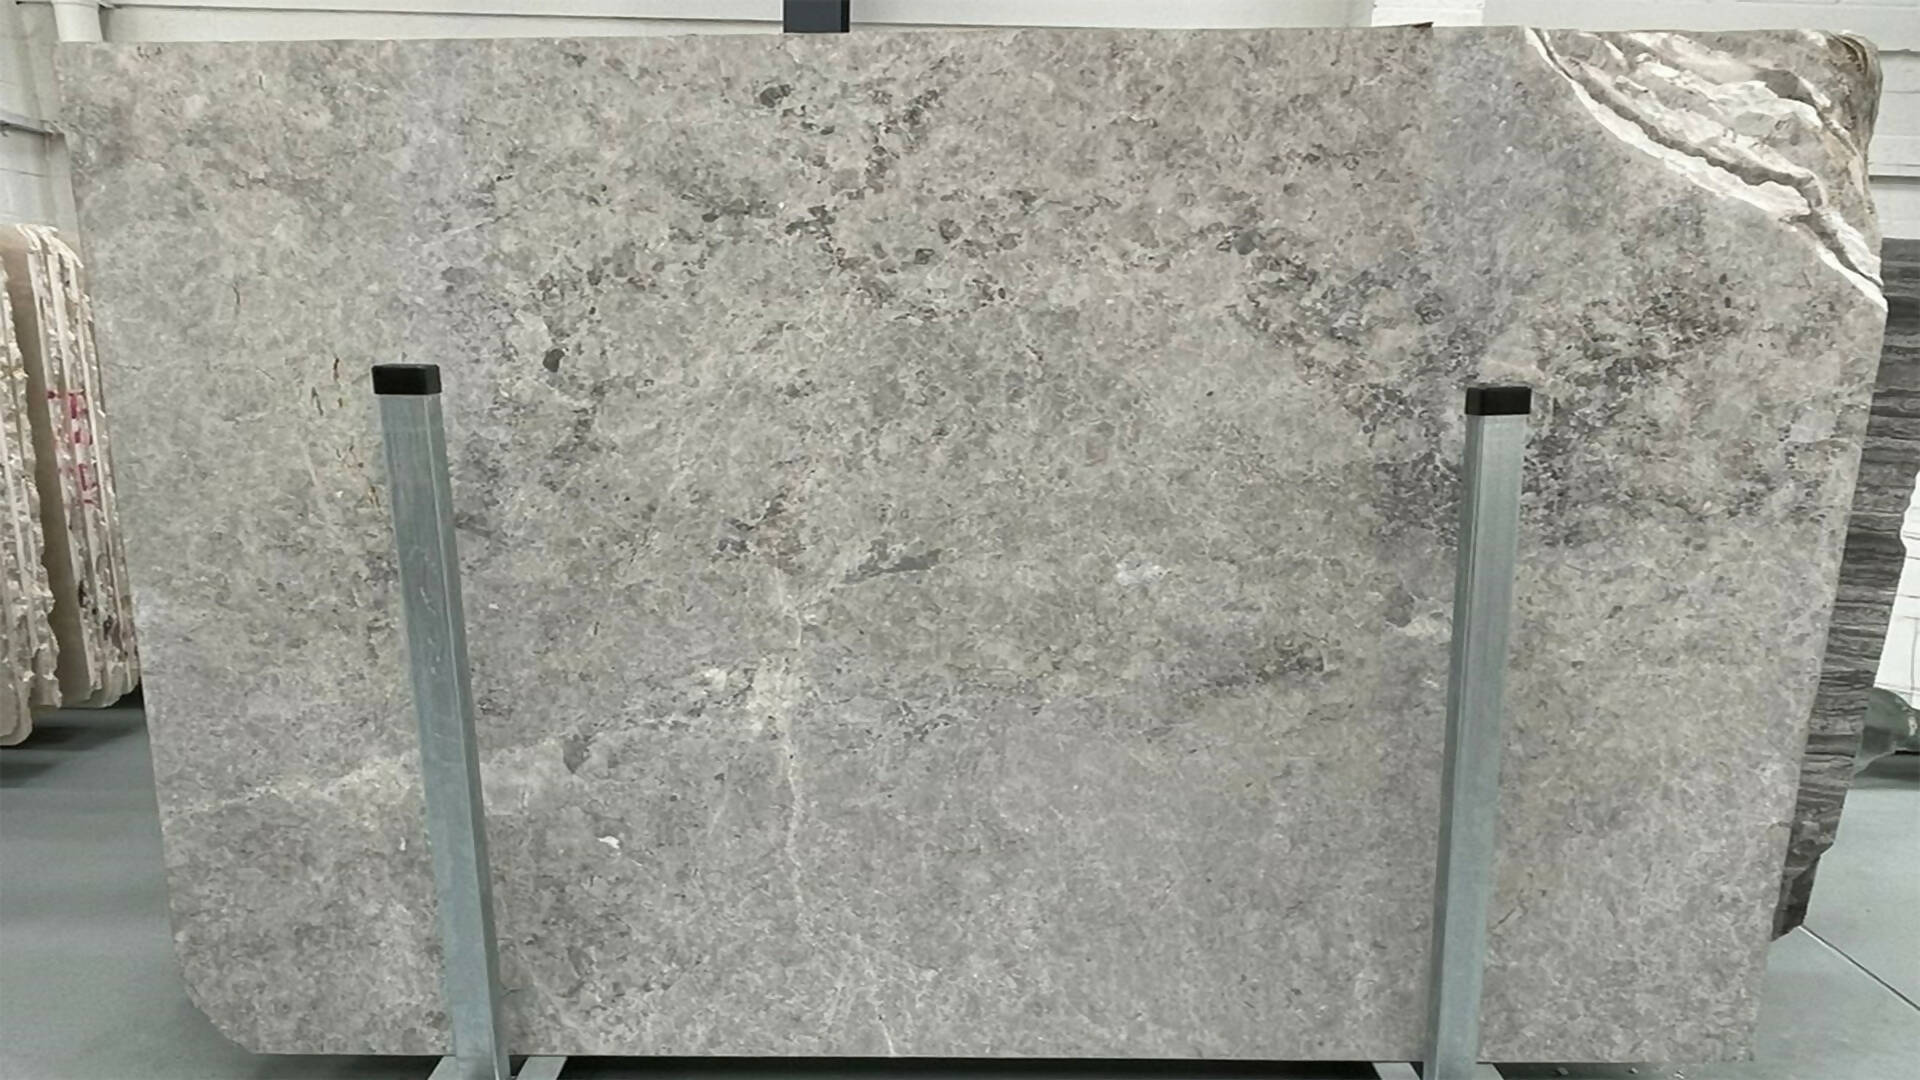 TUNDRA GRAY MARBLE BOOKMATCH,Marble,Work-Tops,www.work-tops.com